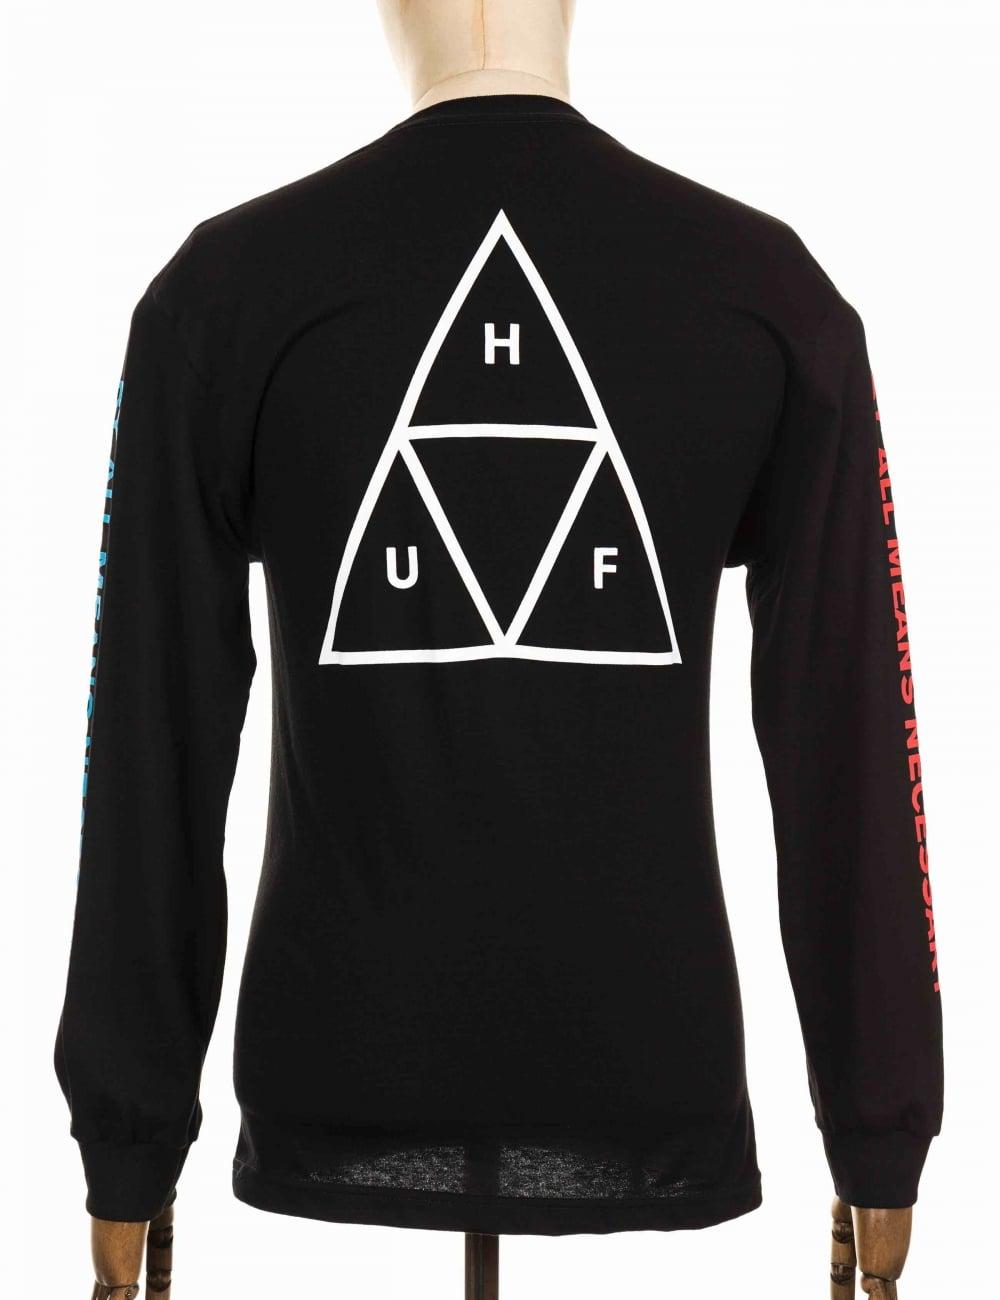 C Triangle T Logo - Huf L S Multi Triple Triangle T Shirt From IConsume UK